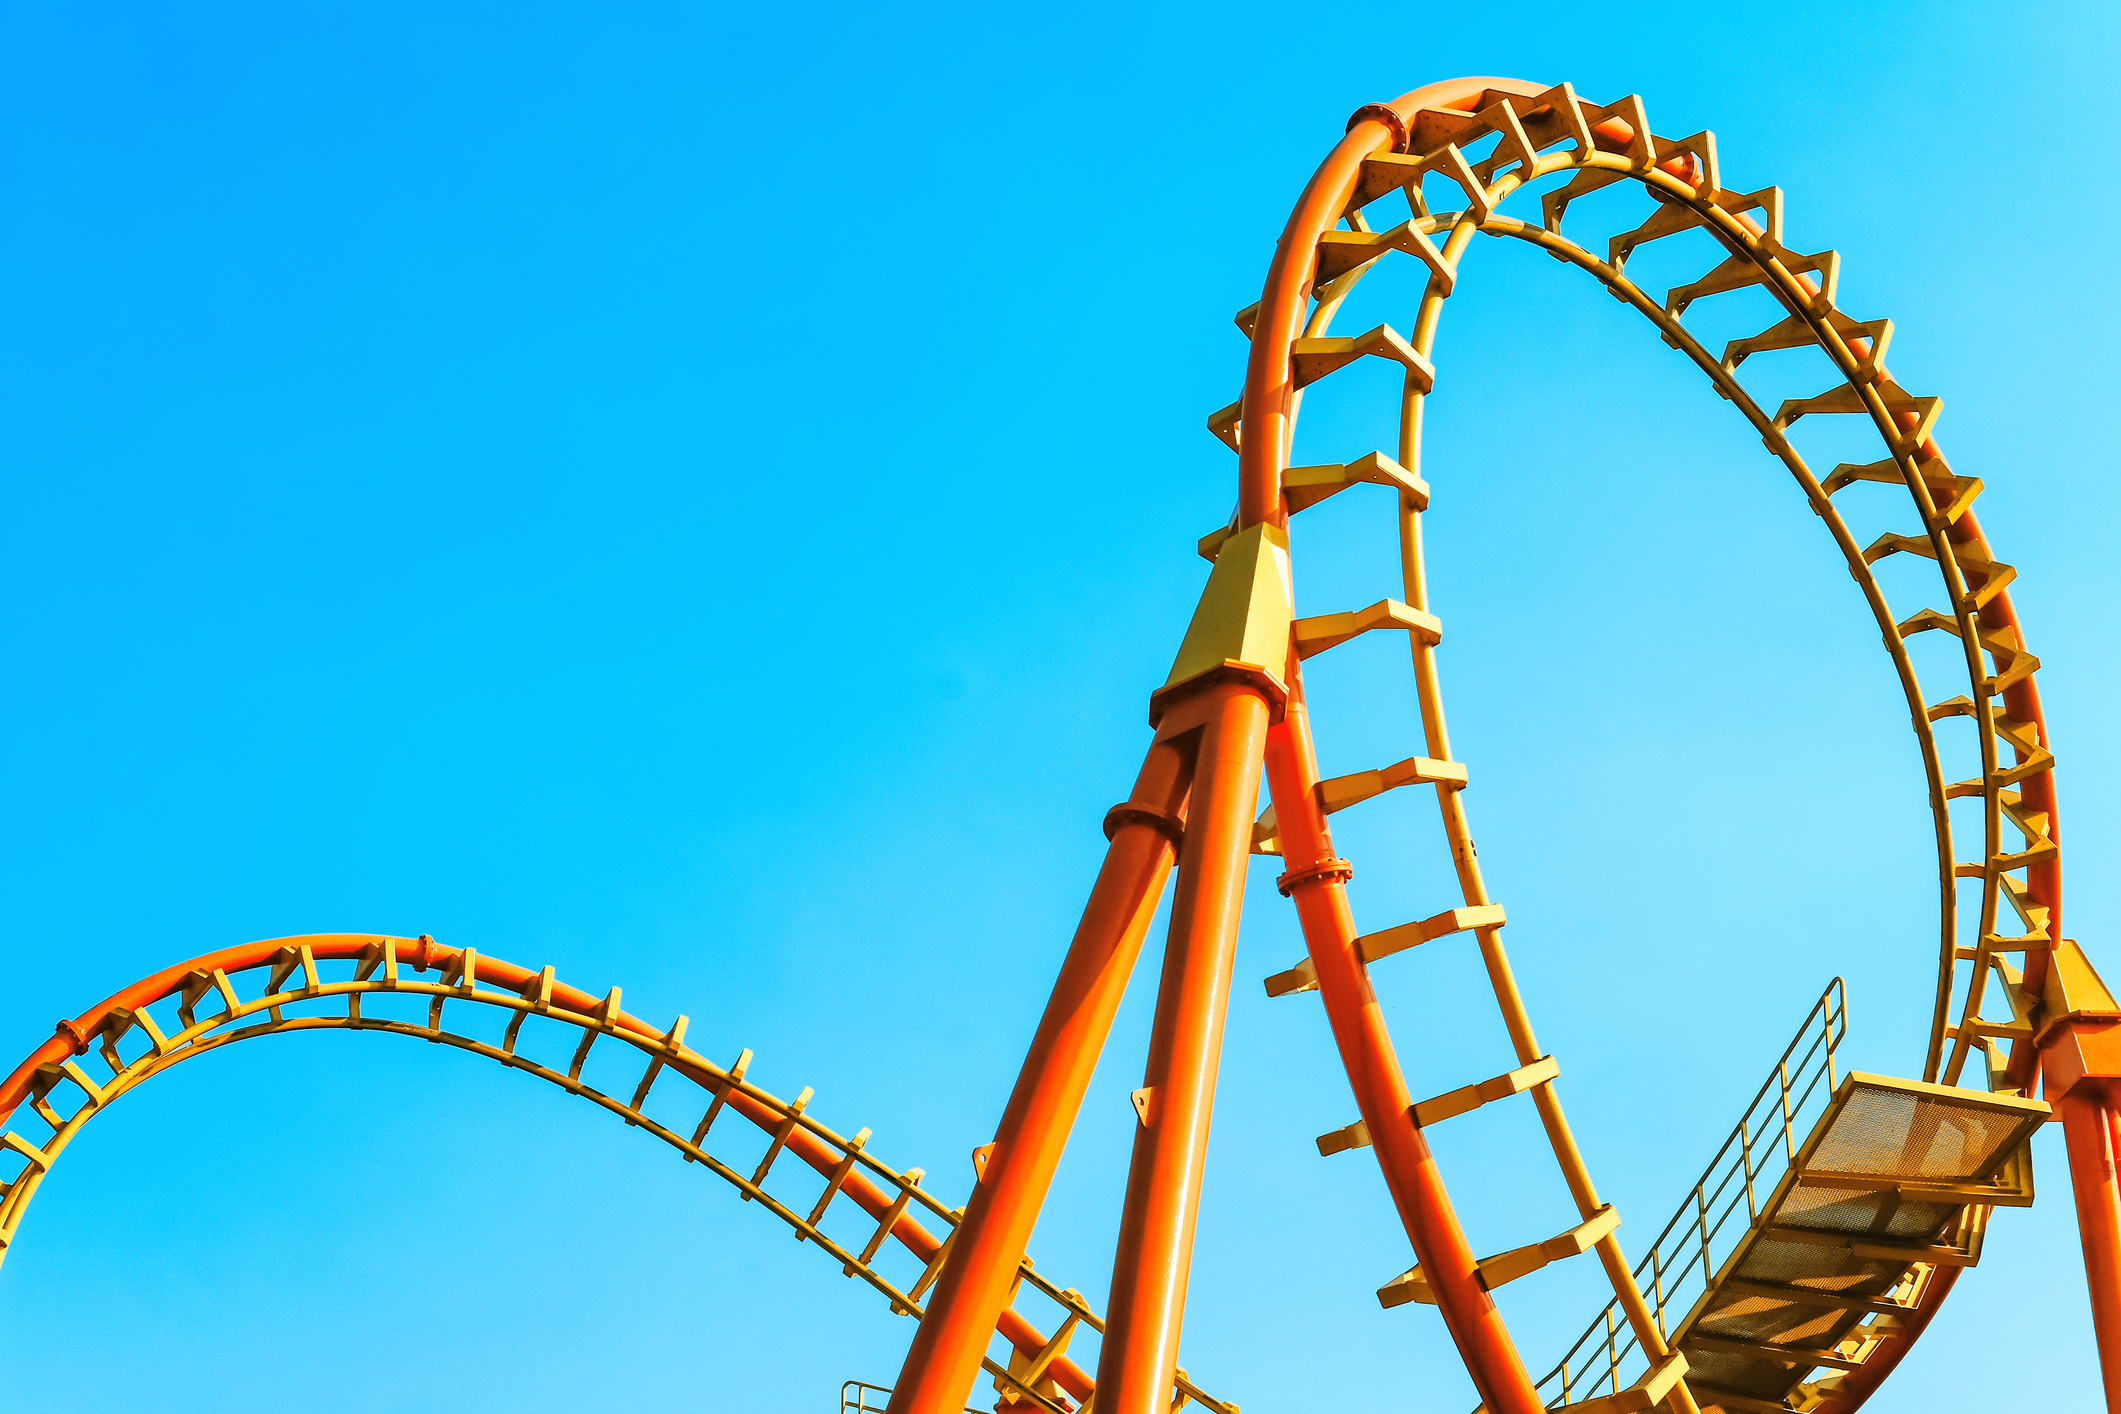 The Internet is Laughing at a Man Who Rides Roller Coasters thumbnail